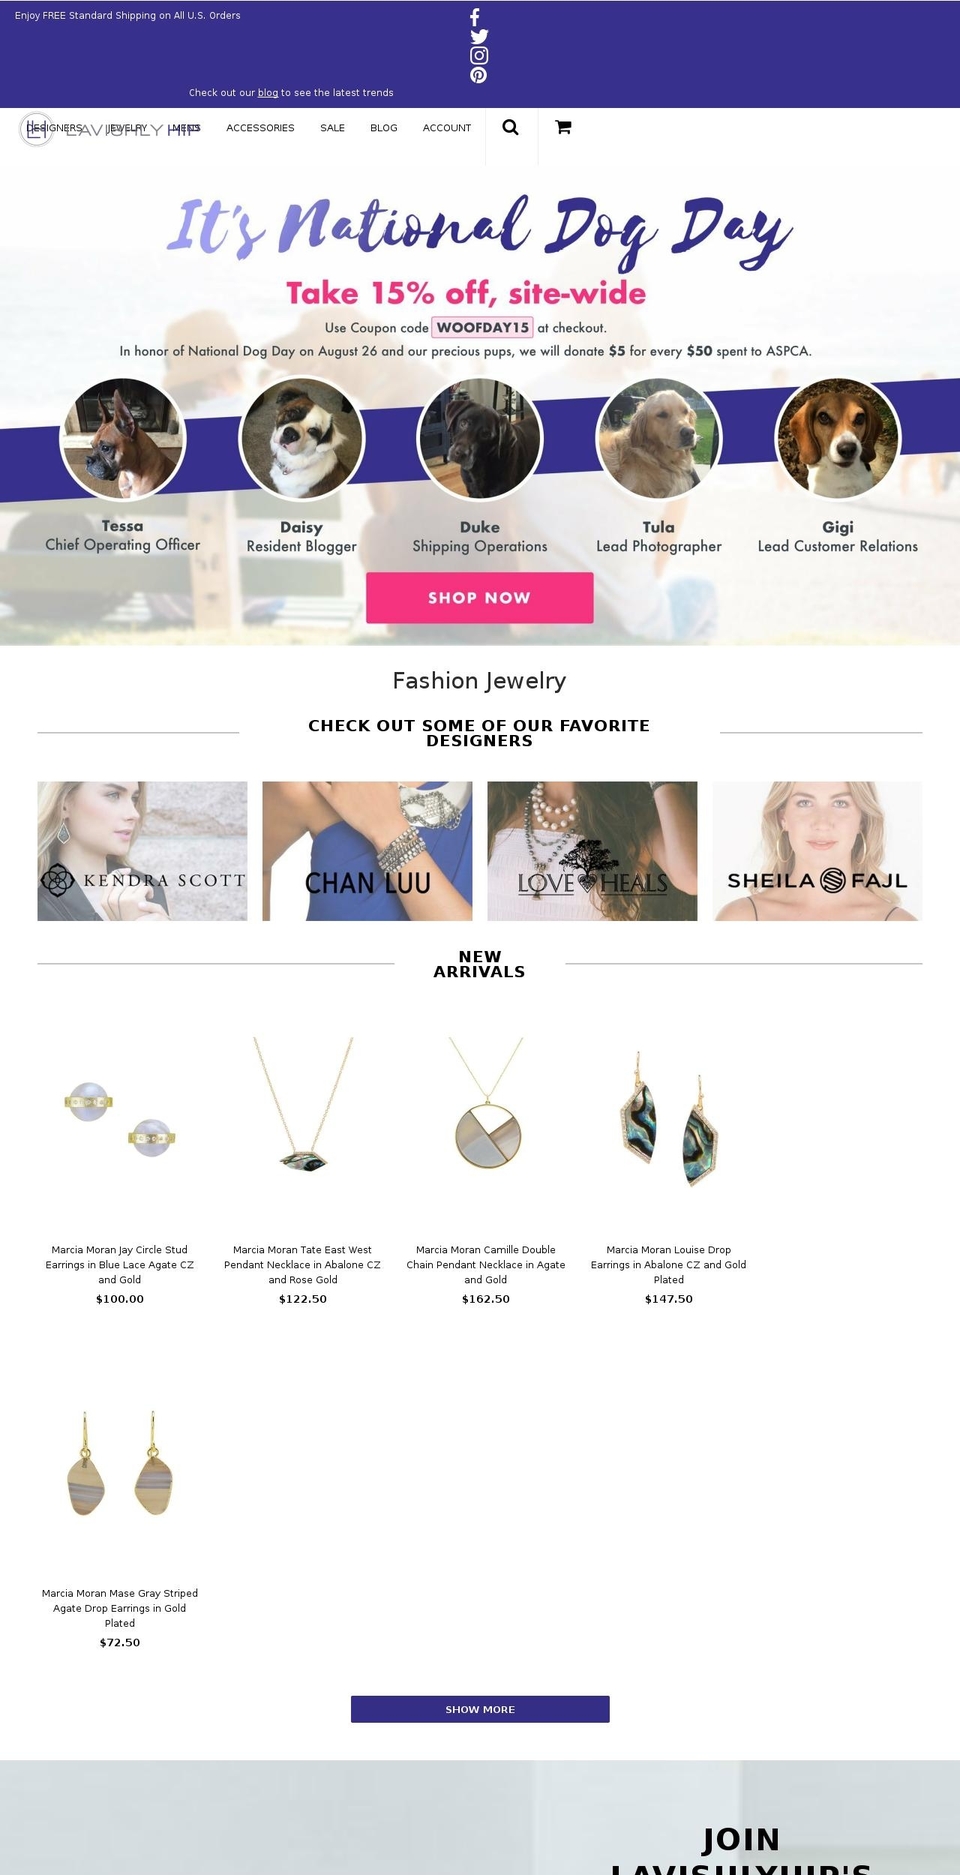 Made With ❤ By Minion Made Shopify theme site example lavishlyhip.com